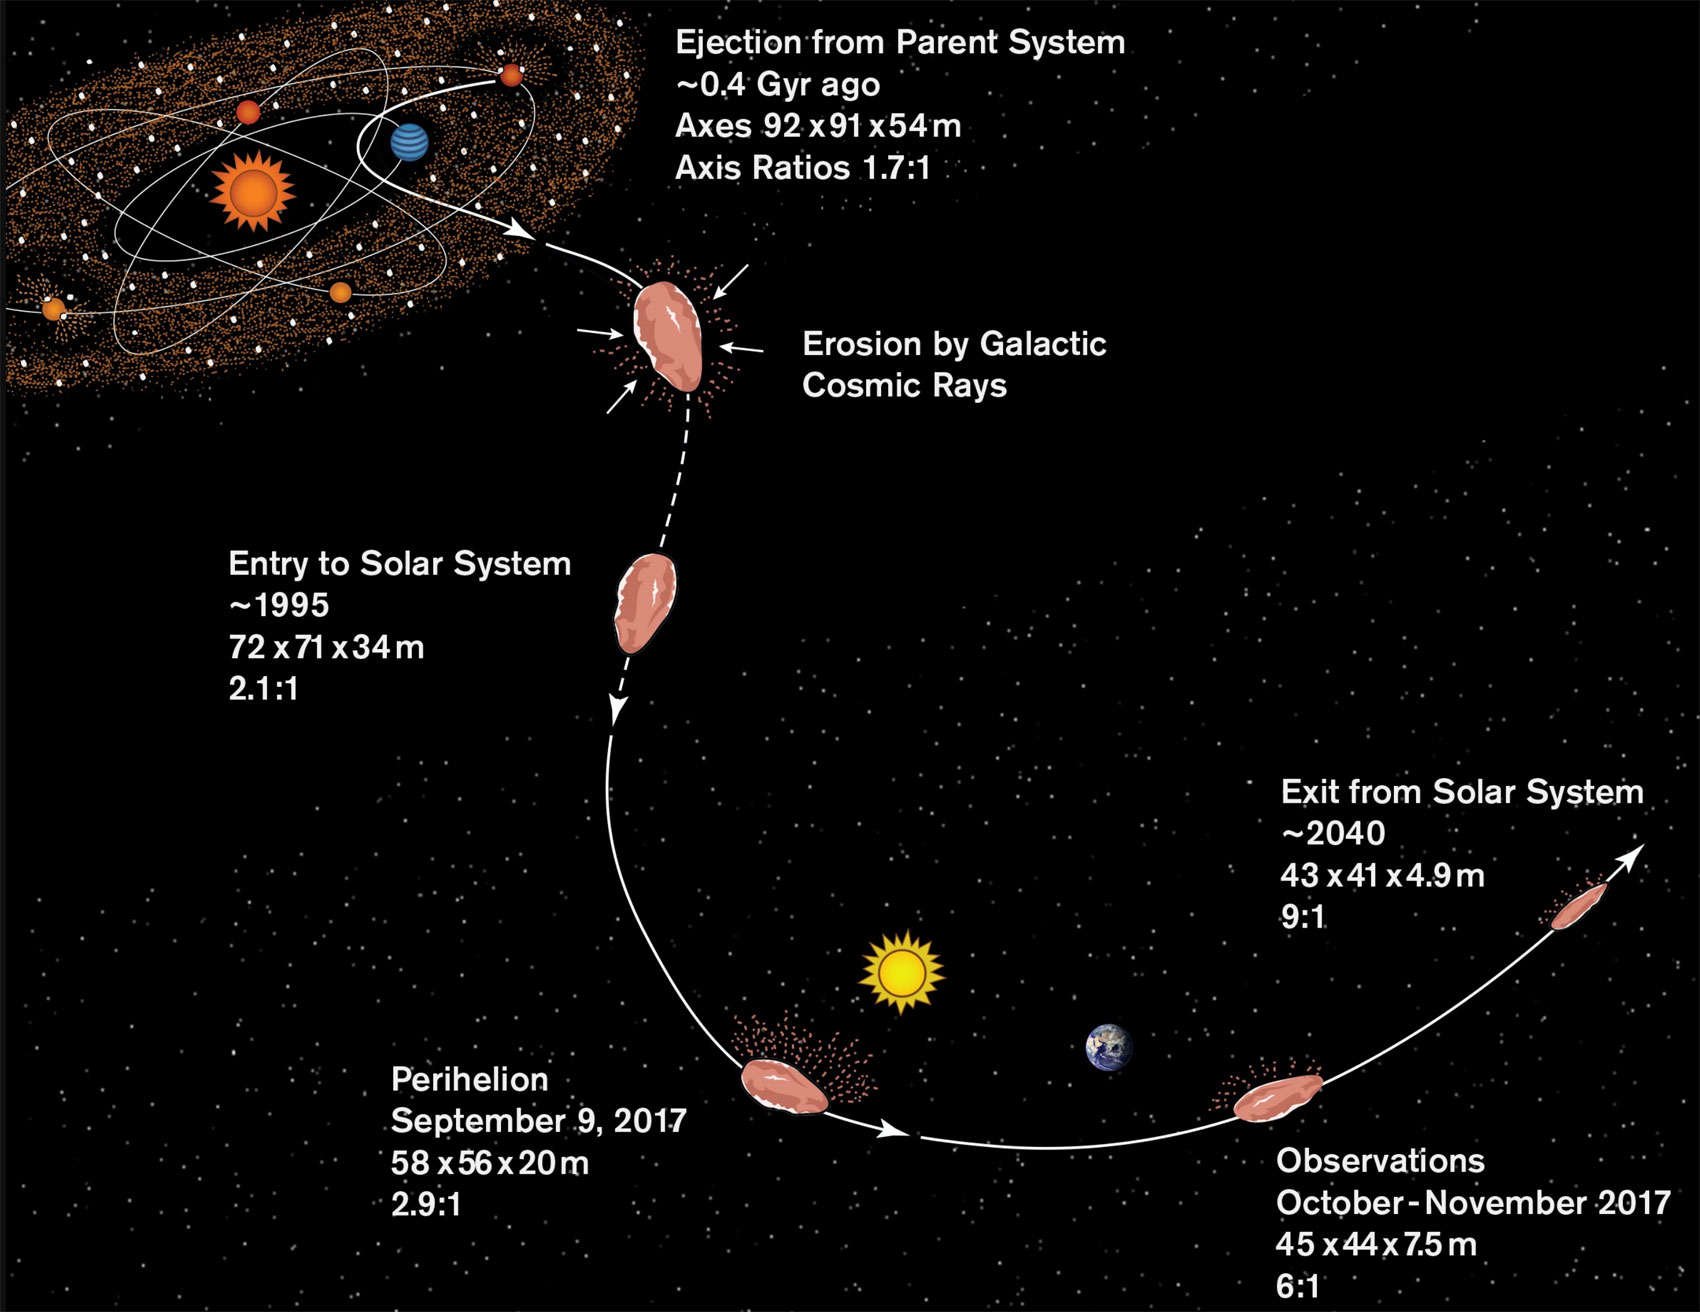 A proposed evolution of ‘Oumuamua over time. It was a fragment shattered off a Pluto-like object around another star hundreds of million of years ago, traveled the galaxy, and eventually passed the Sun.